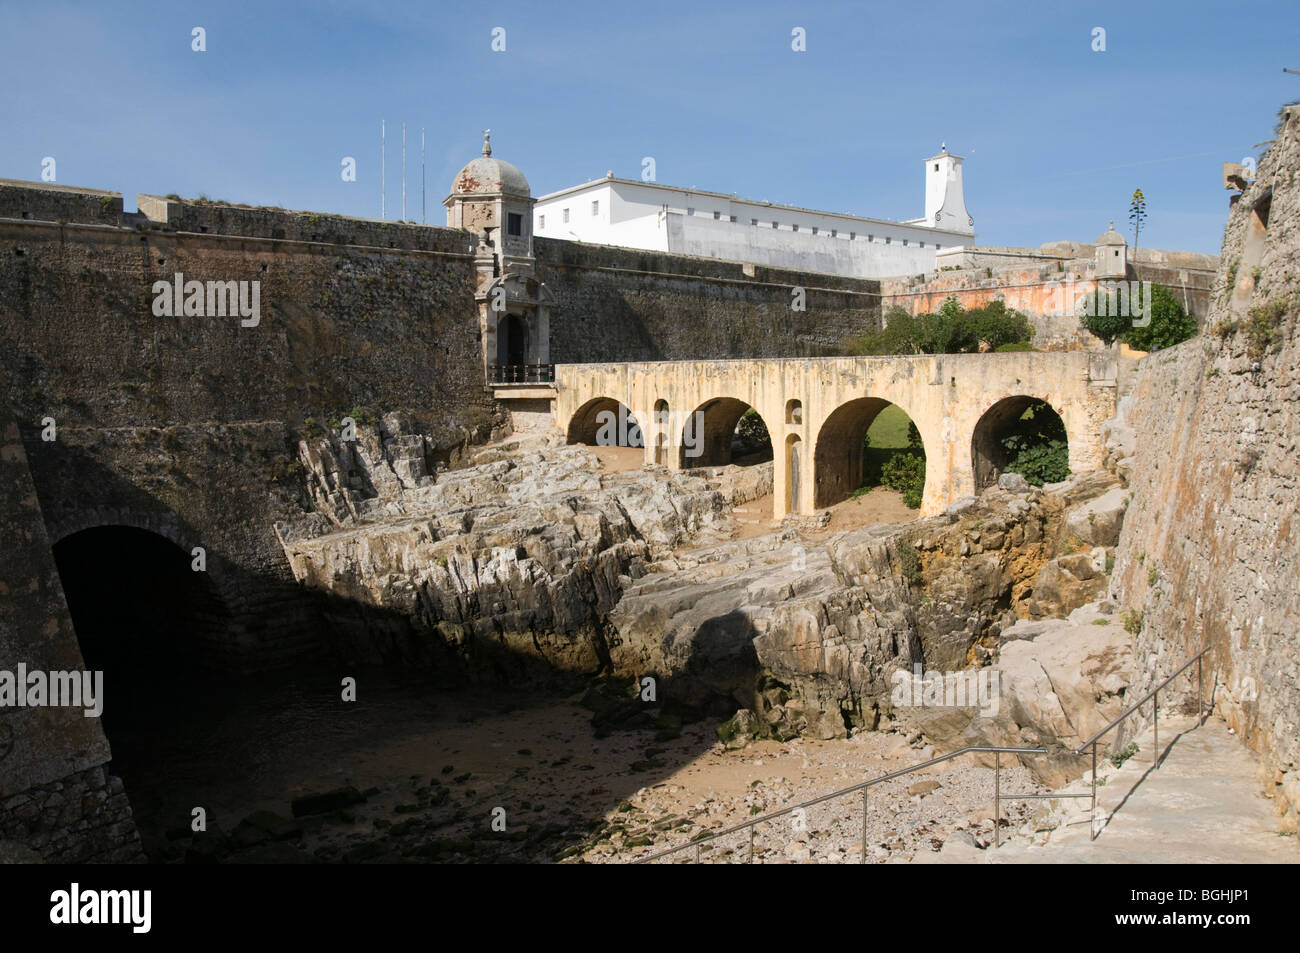 fortress of Peniche used as the political jail during the Salazar dictatorship in Portugal Stock Photo